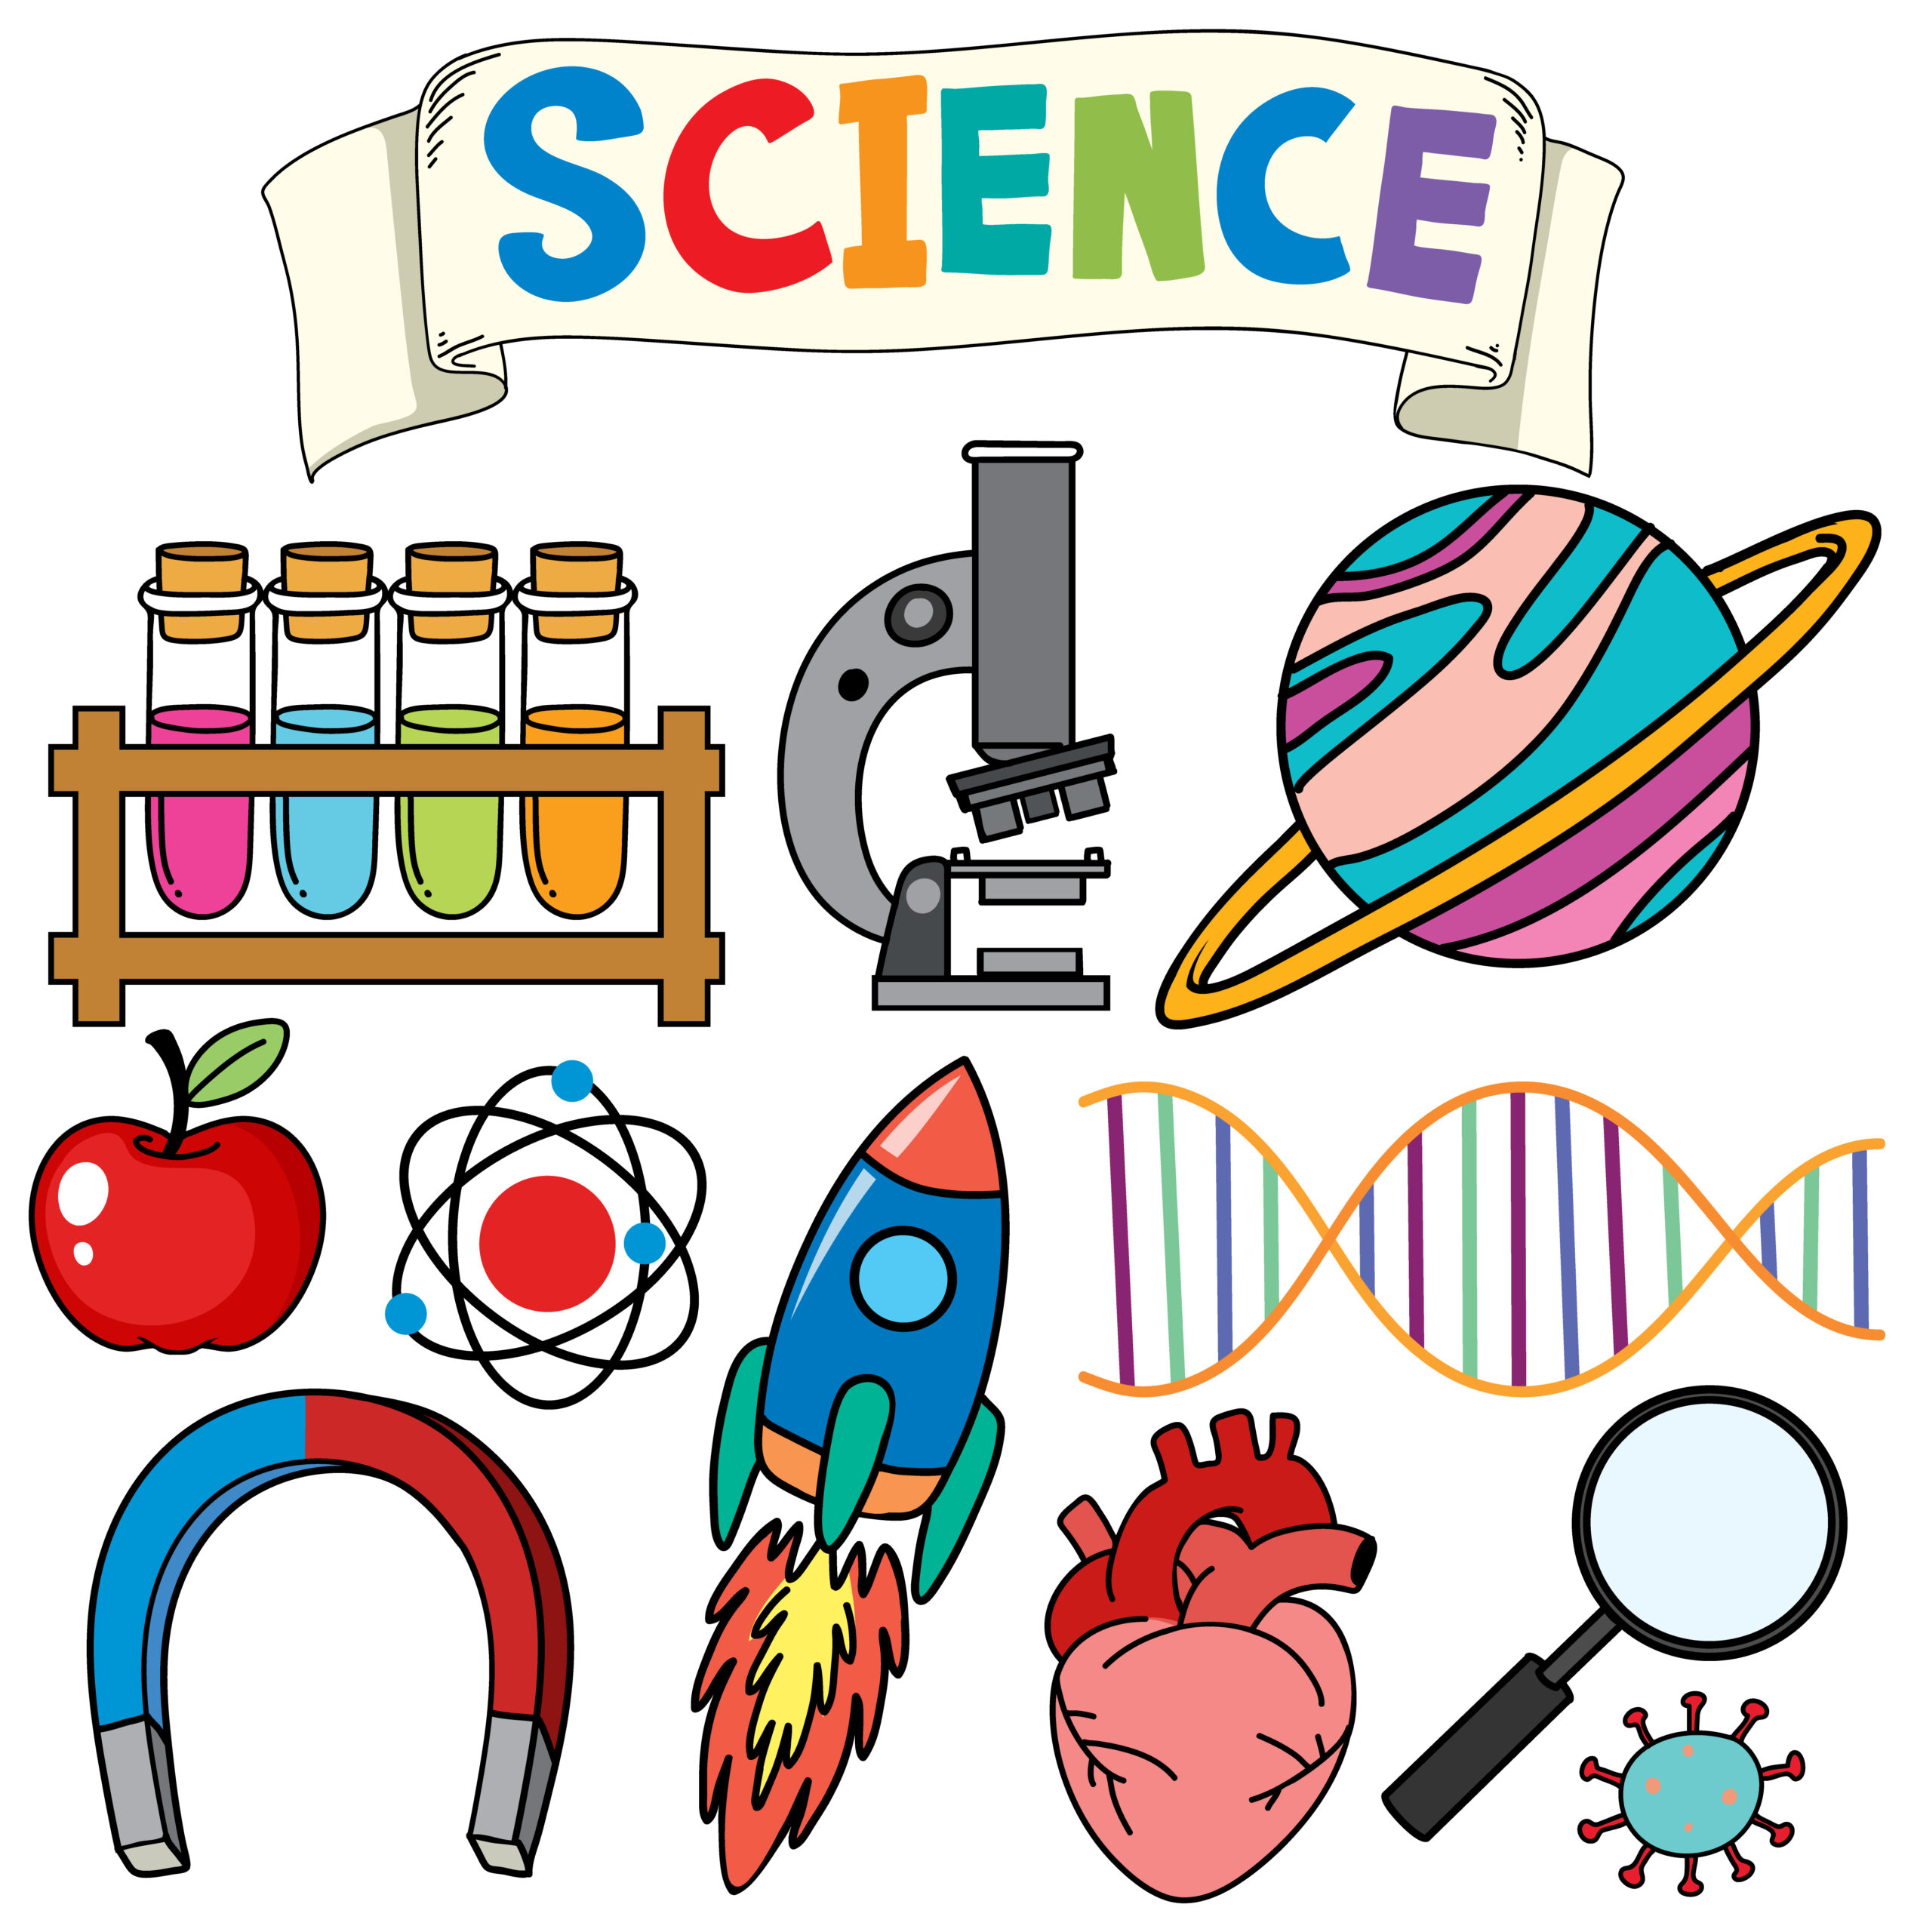 Colorful Science Objects and Icons Vector Set illustration